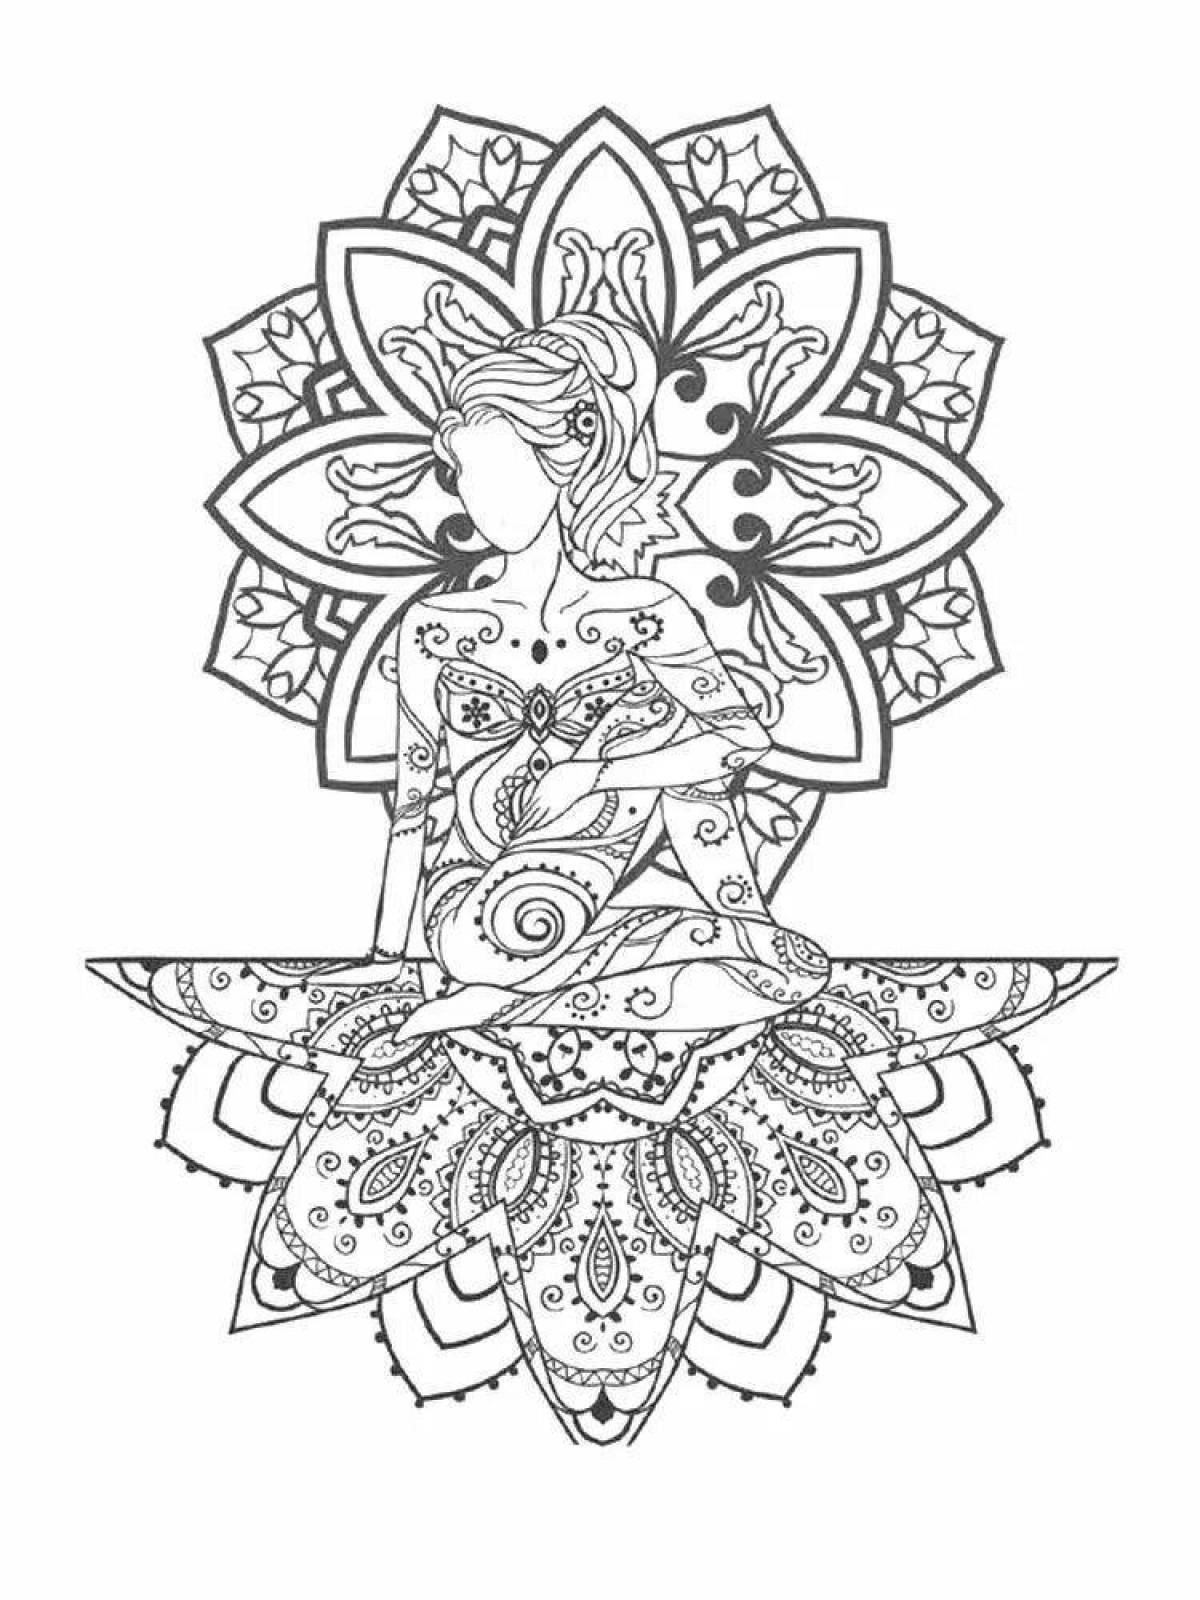 Exciting yoga coloring book